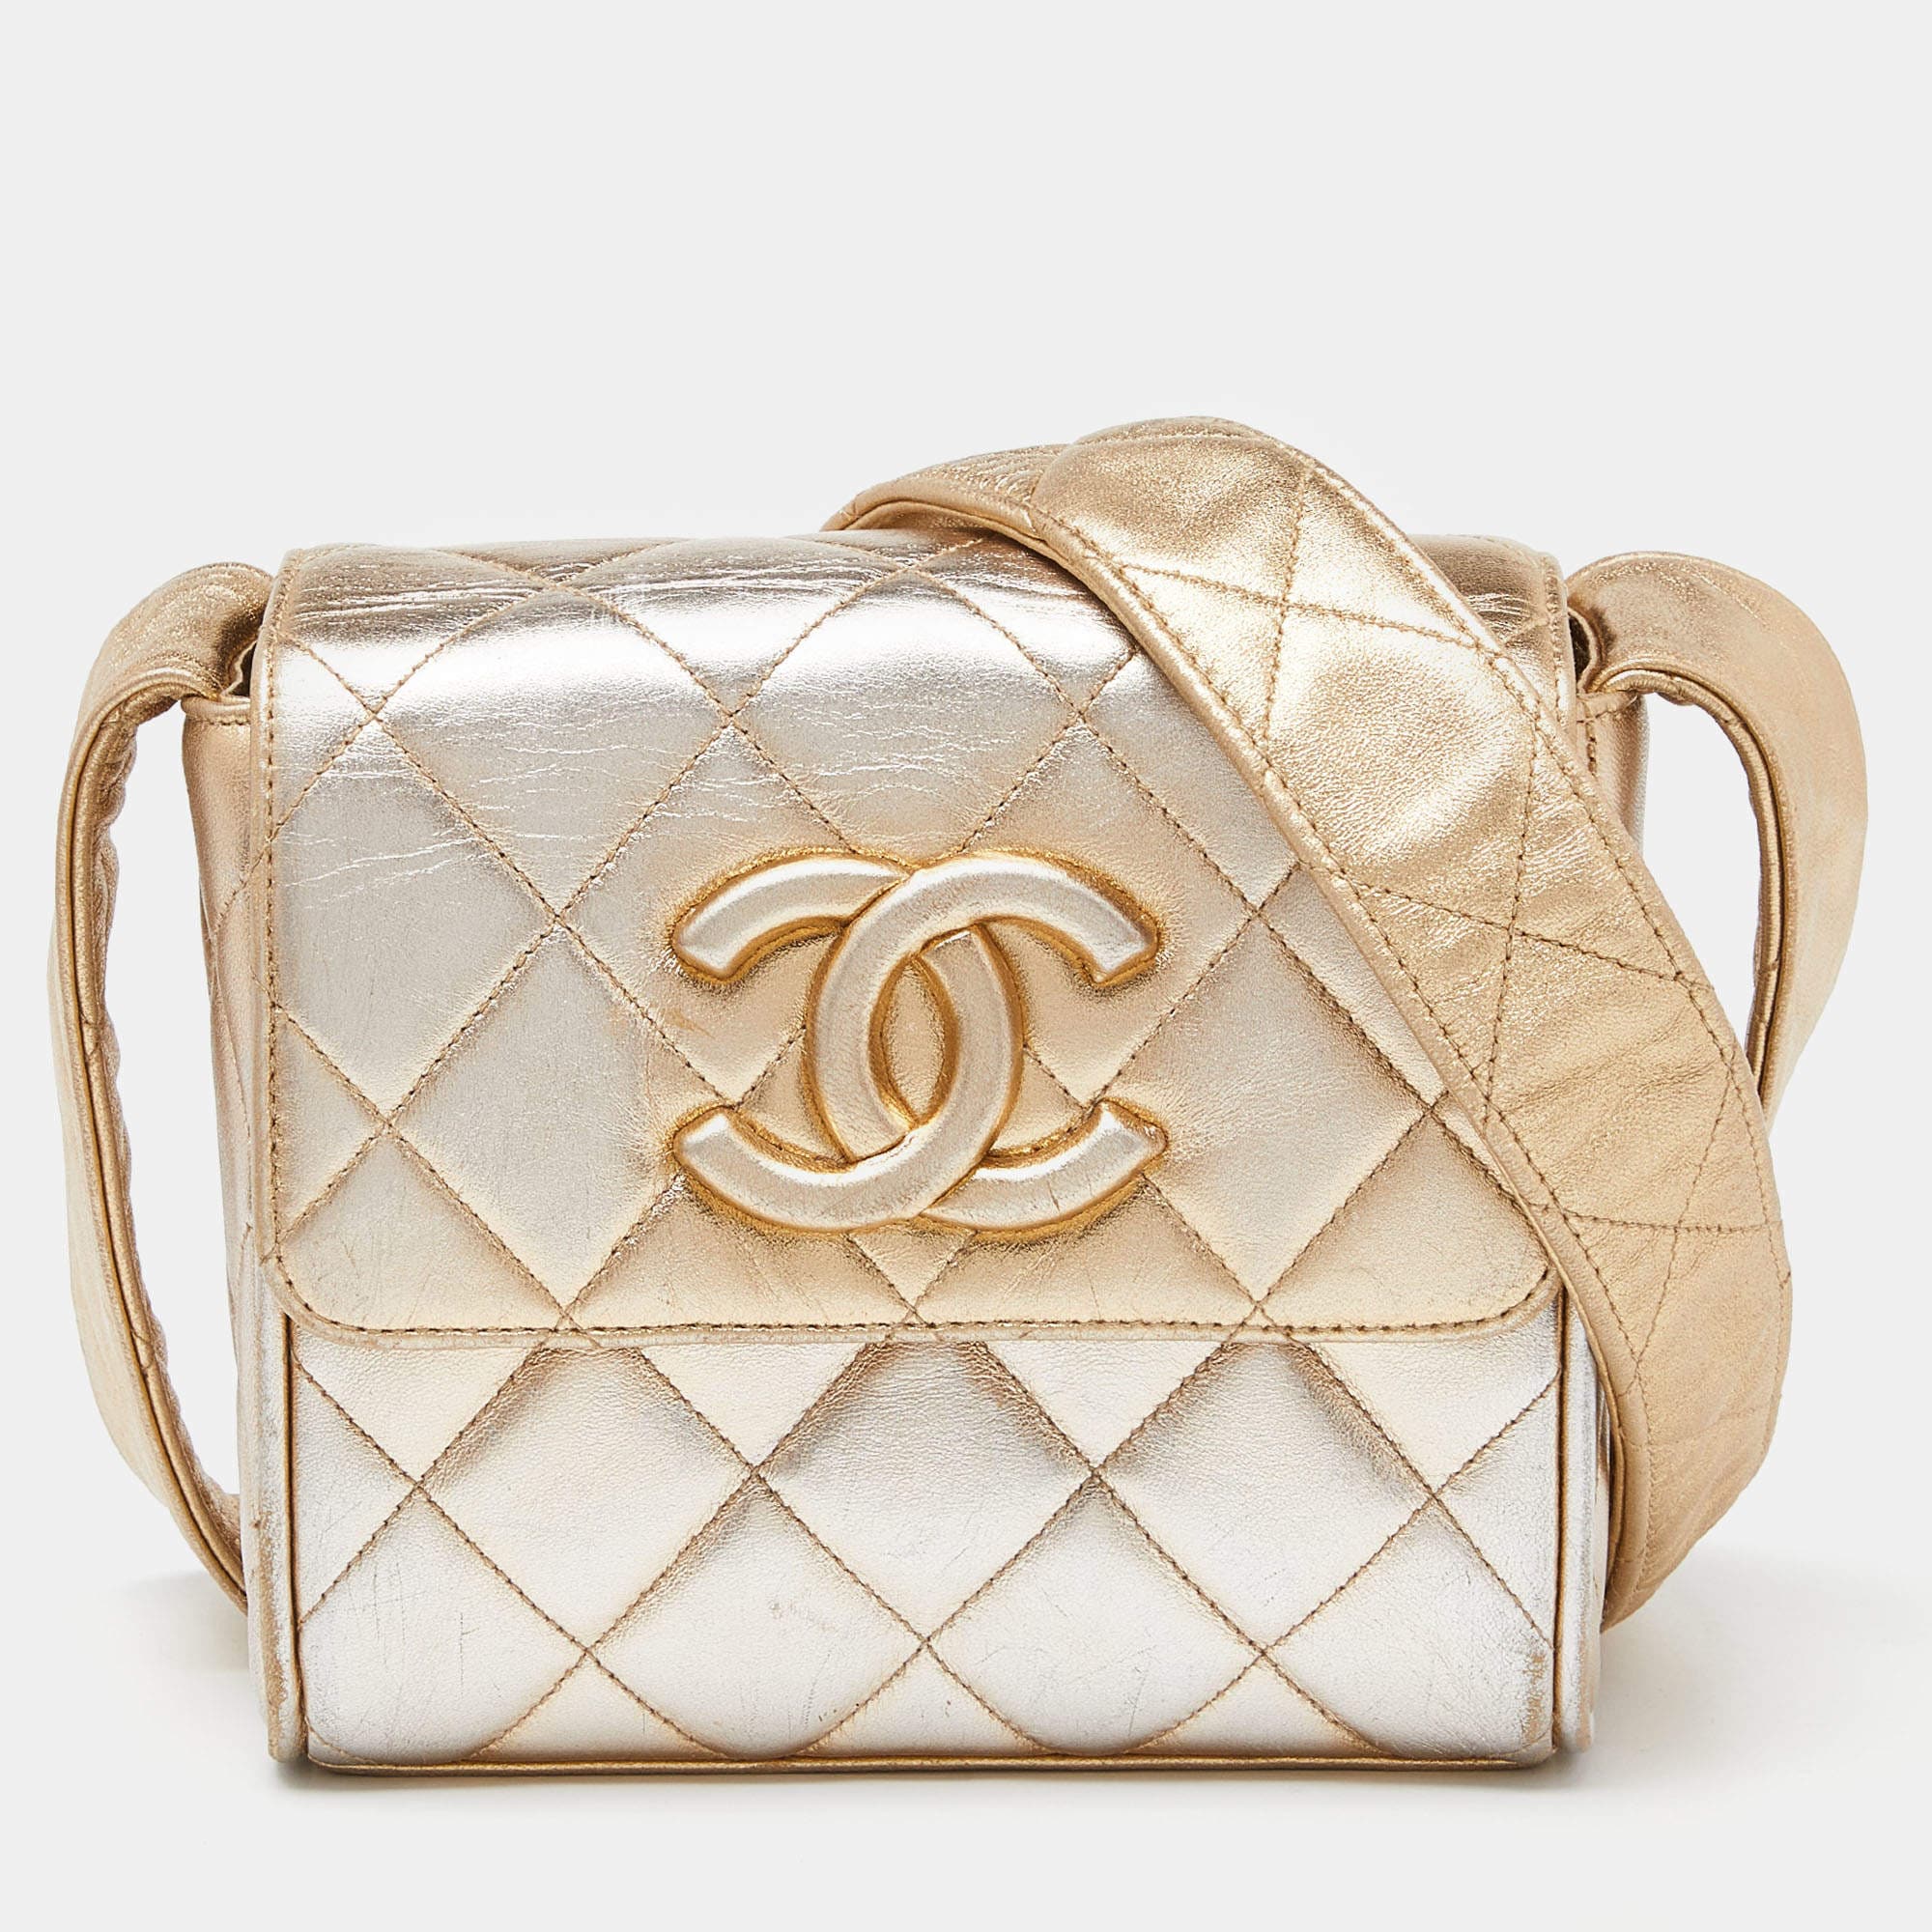 Chanel chanel gold bag ASCLC2462